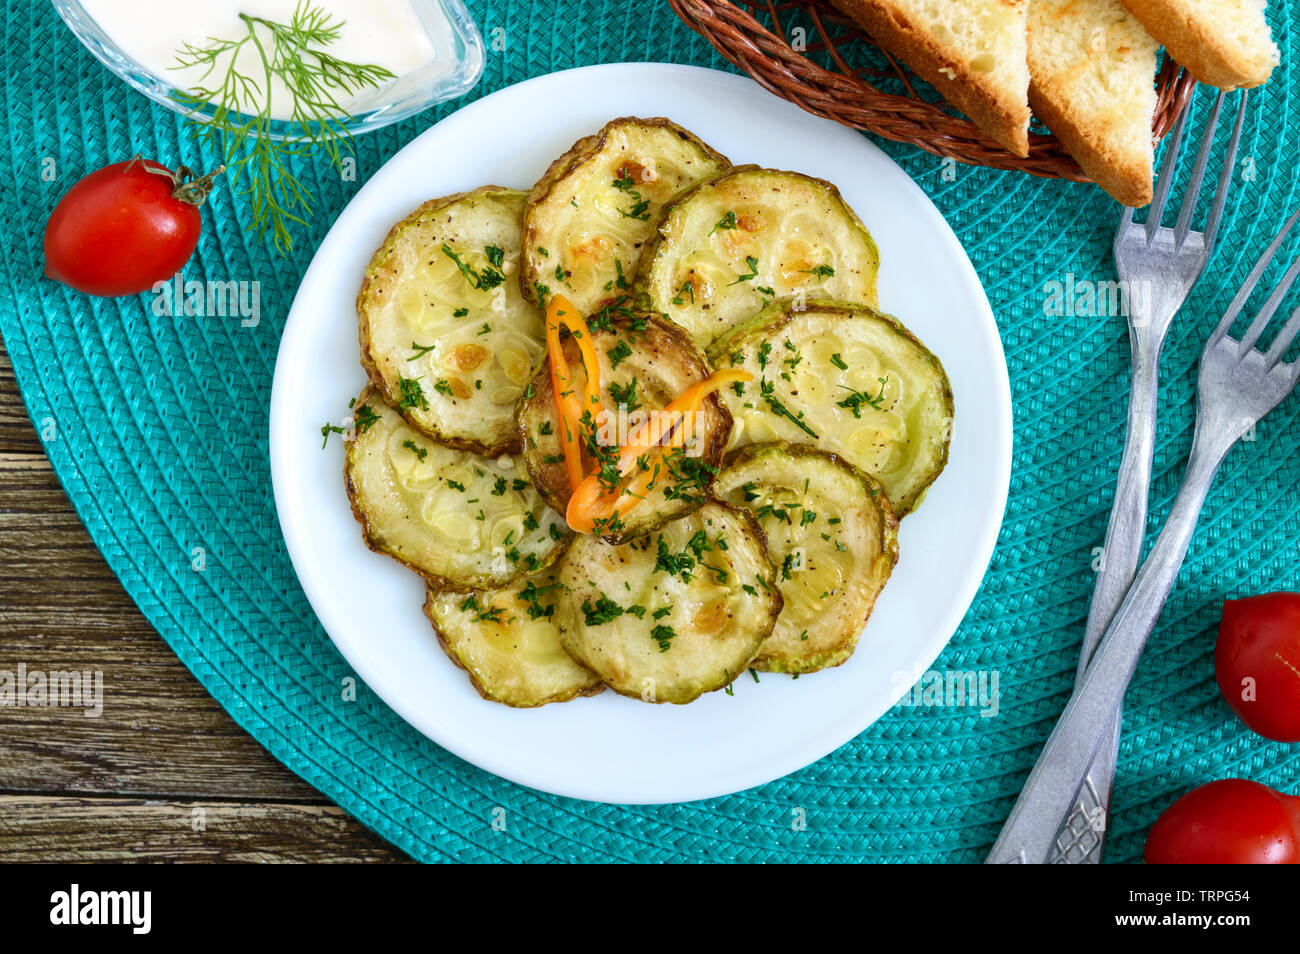 Tasty fried zucchini slices on a plate with sauce on a wooden table. Picnic snack. Rustic style. Top view, flat lay. Stock Photo